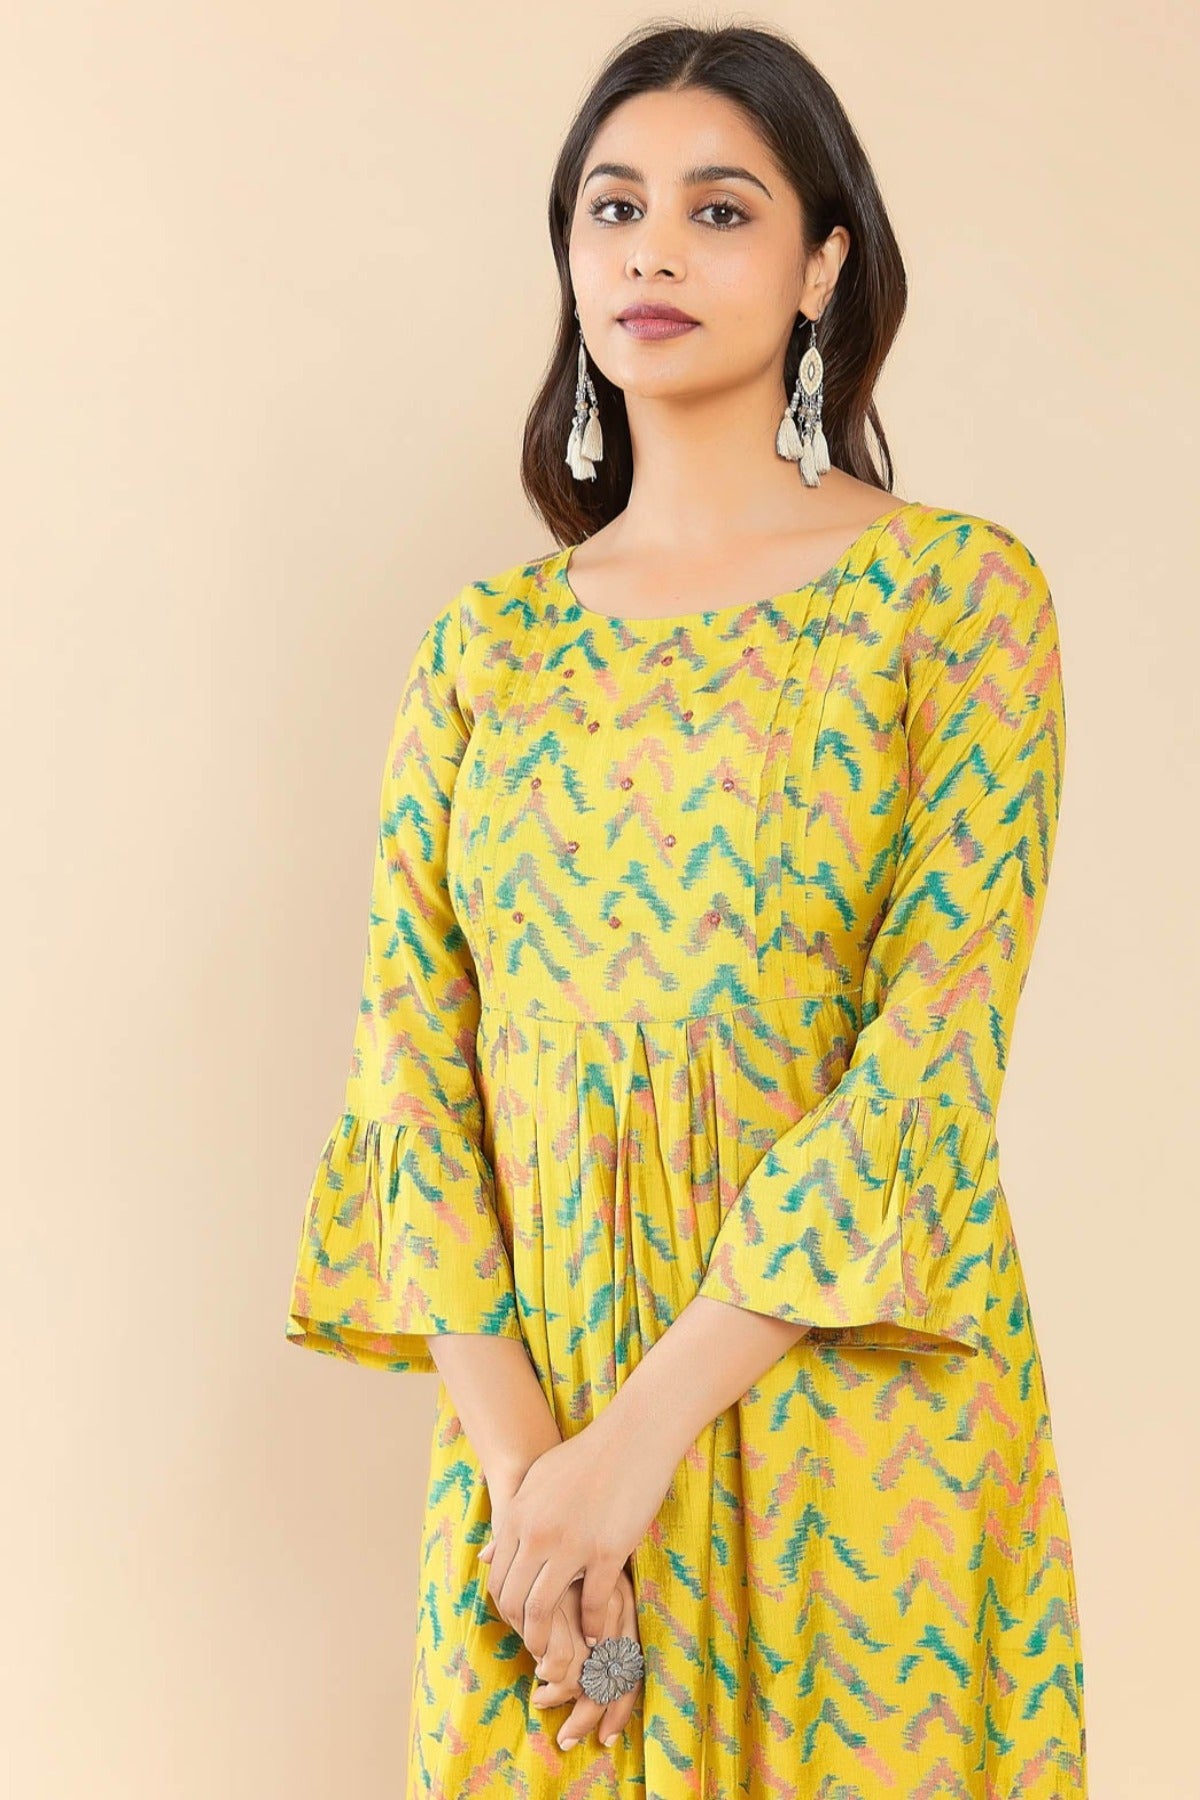 Contract Chevron Printed & Foil Mirror Embellished A-Line Kurta -  Yellow